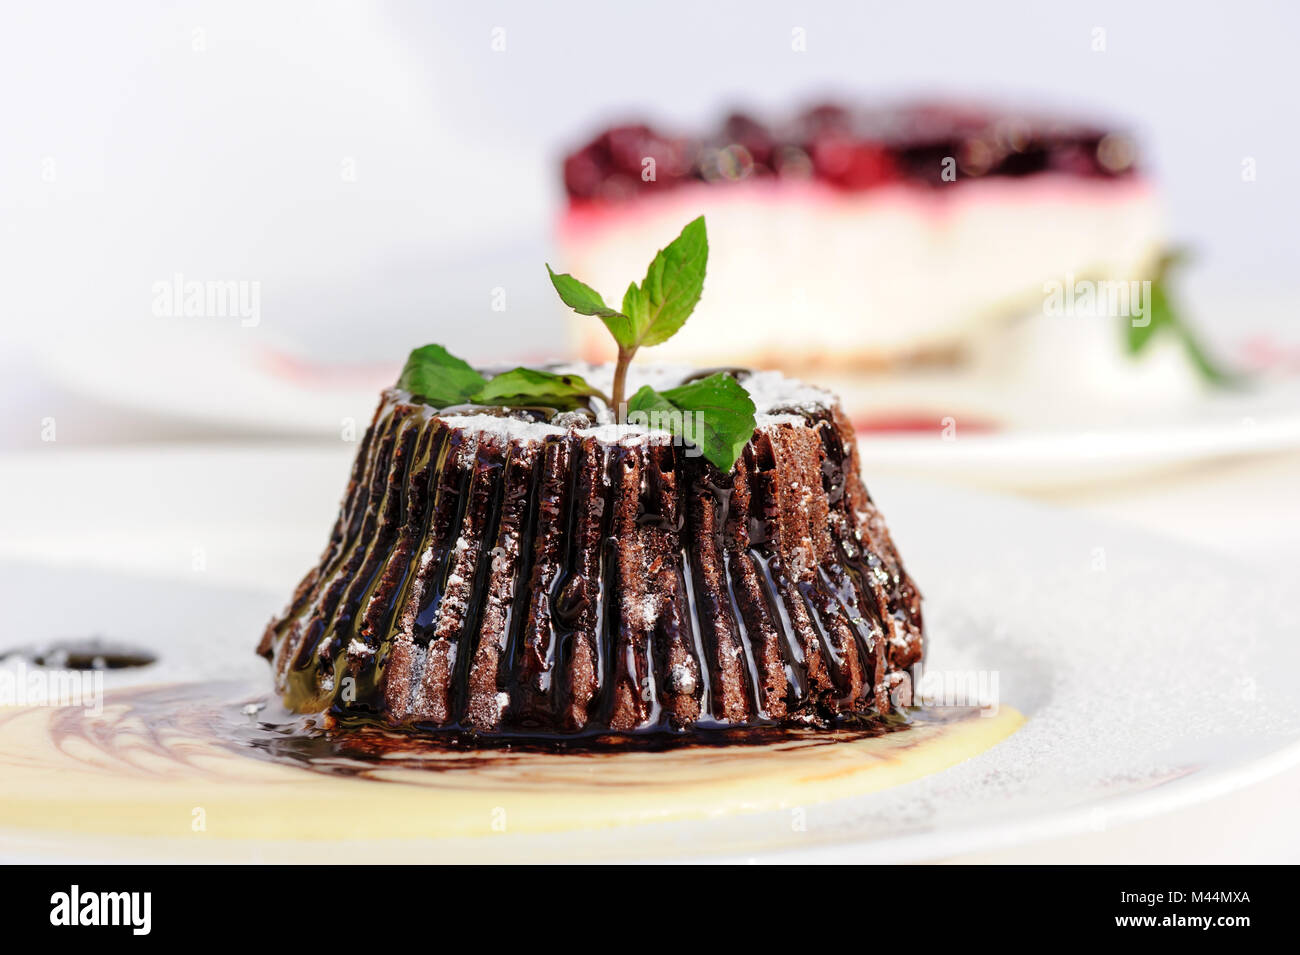 Chocolate fondant with peppermint leaves Stock Photo